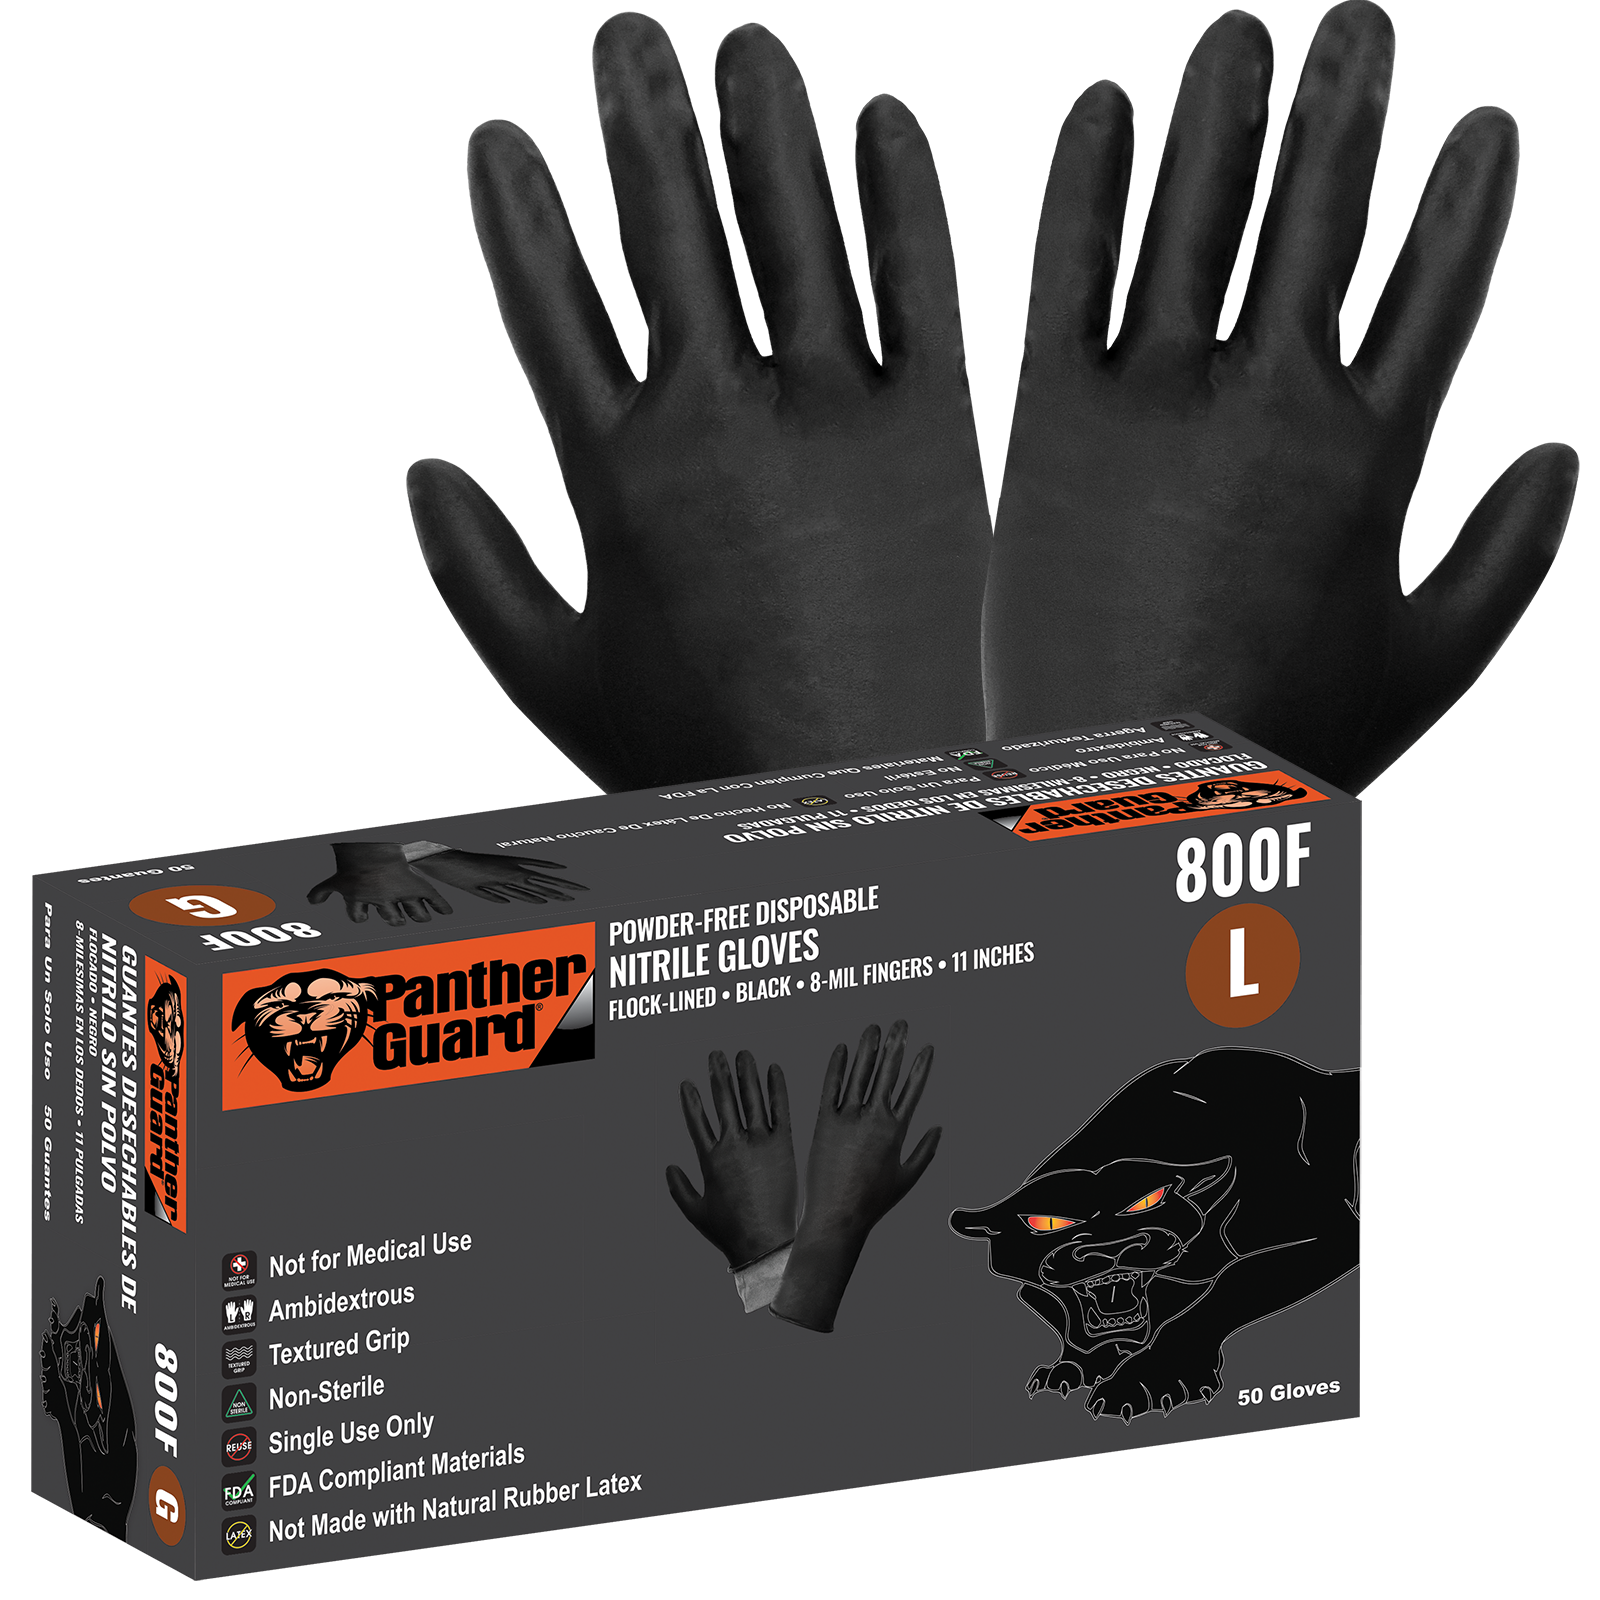 Panther-Guard® Heavyweight Nitrile, Powder-Free, Industrial-Grade, Black, 8-Mil, Flock Lined, Textured Fingertips, 11-Inch Disposable Gloves - 800F